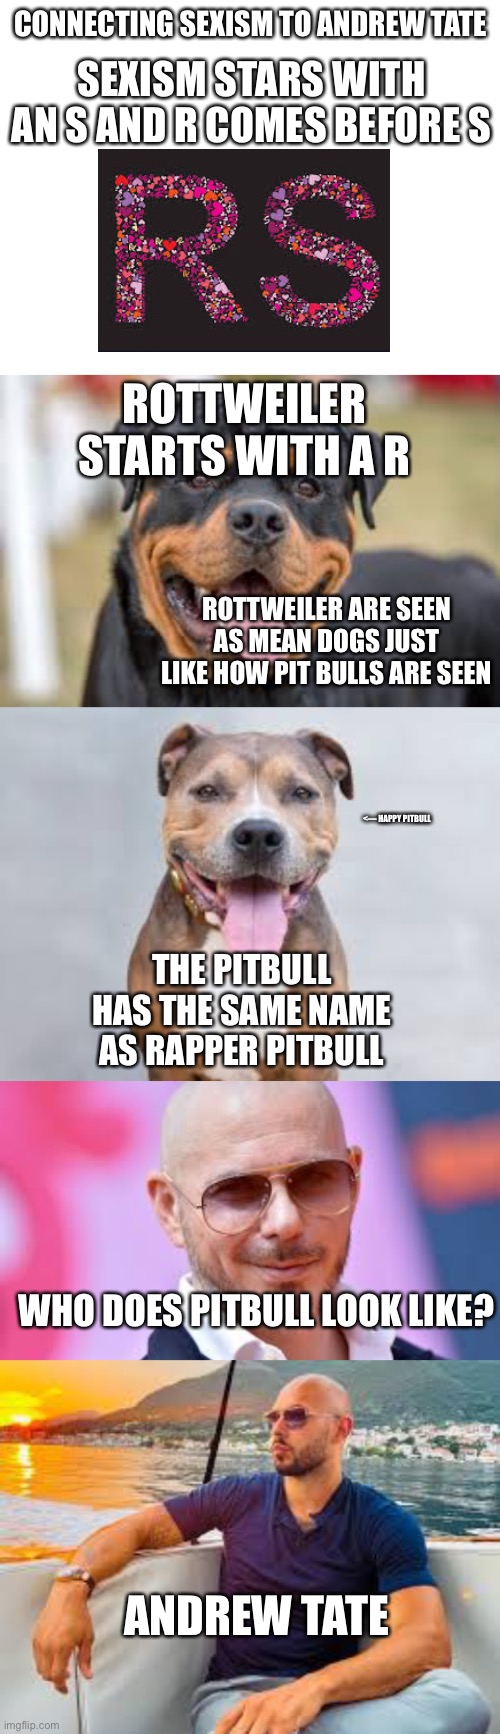 Funny title | CONNECTING SEXISM TO ANDREW TATE; SEXISM STARS WITH AN S AND R COMES BEFORE S; ROTTWEILER STARTS WITH A R; ROTTWEILER ARE SEEN AS MEAN DOGS JUST LIKE HOW PIT BULLS ARE SEEN; <— HAPPY PITBULL; THE PITBULL HAS THE SAME NAME AS RAPPER PITBULL; WHO DOES PITBULL LOOK LIKE? ANDREW TATE | image tagged in blank white template,connection,funny | made w/ Imgflip meme maker